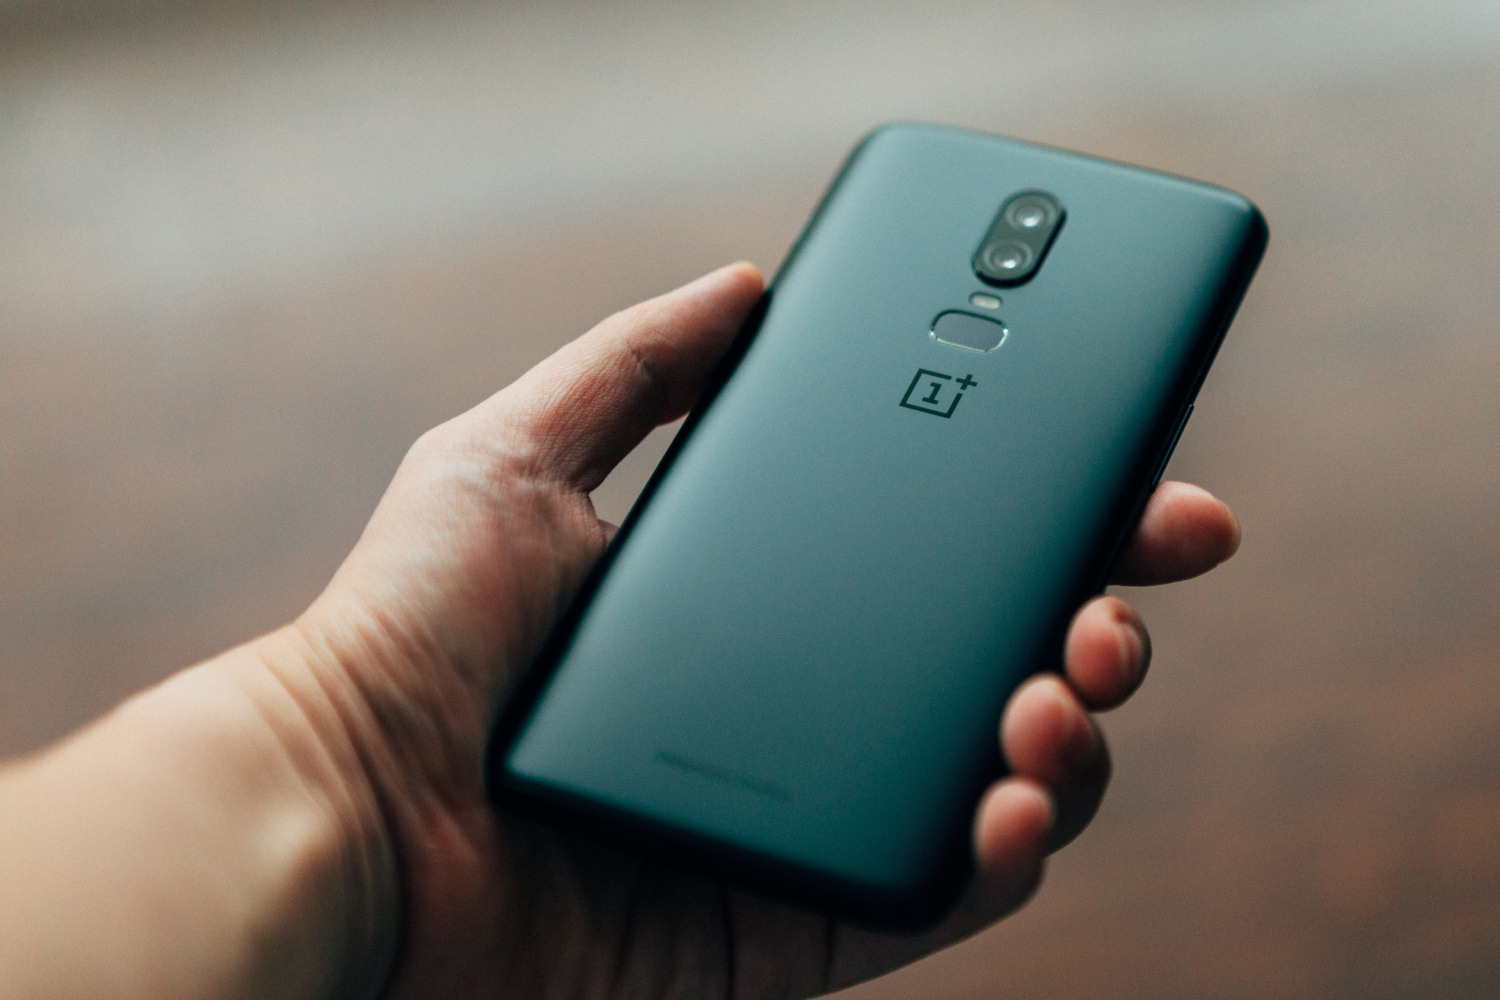 Good boring: A OnePlus 6 on lineageos as daily driver